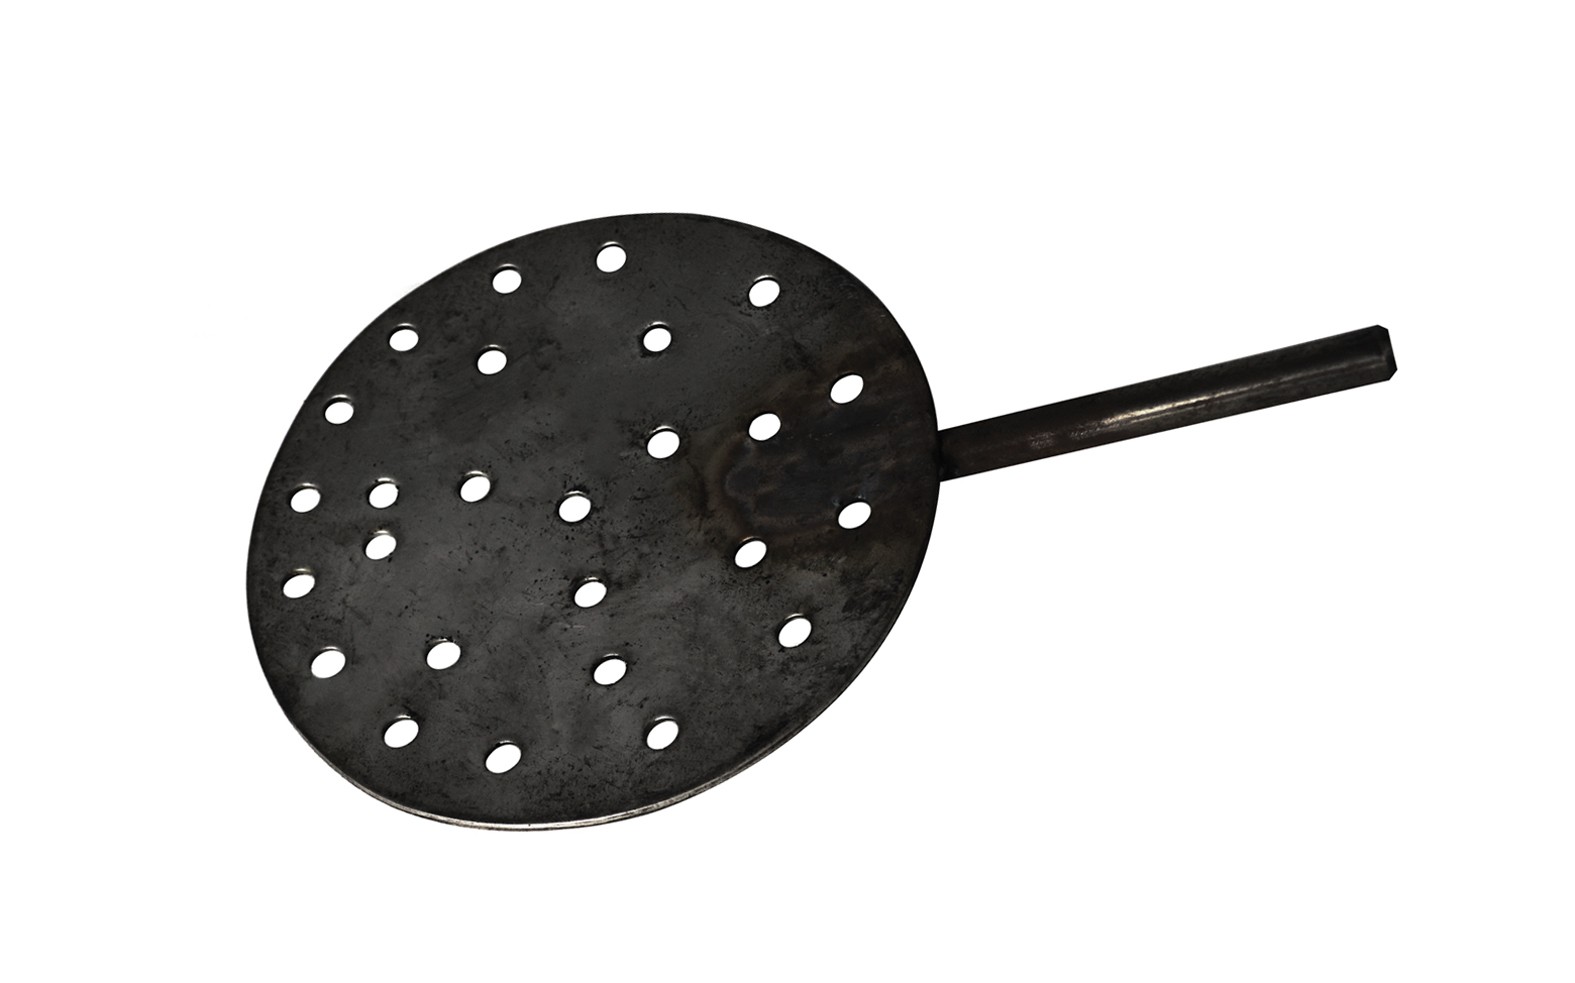 6" Diameter Carbon Steel Shallow Dish Skimmer with Holes and Steel Handle